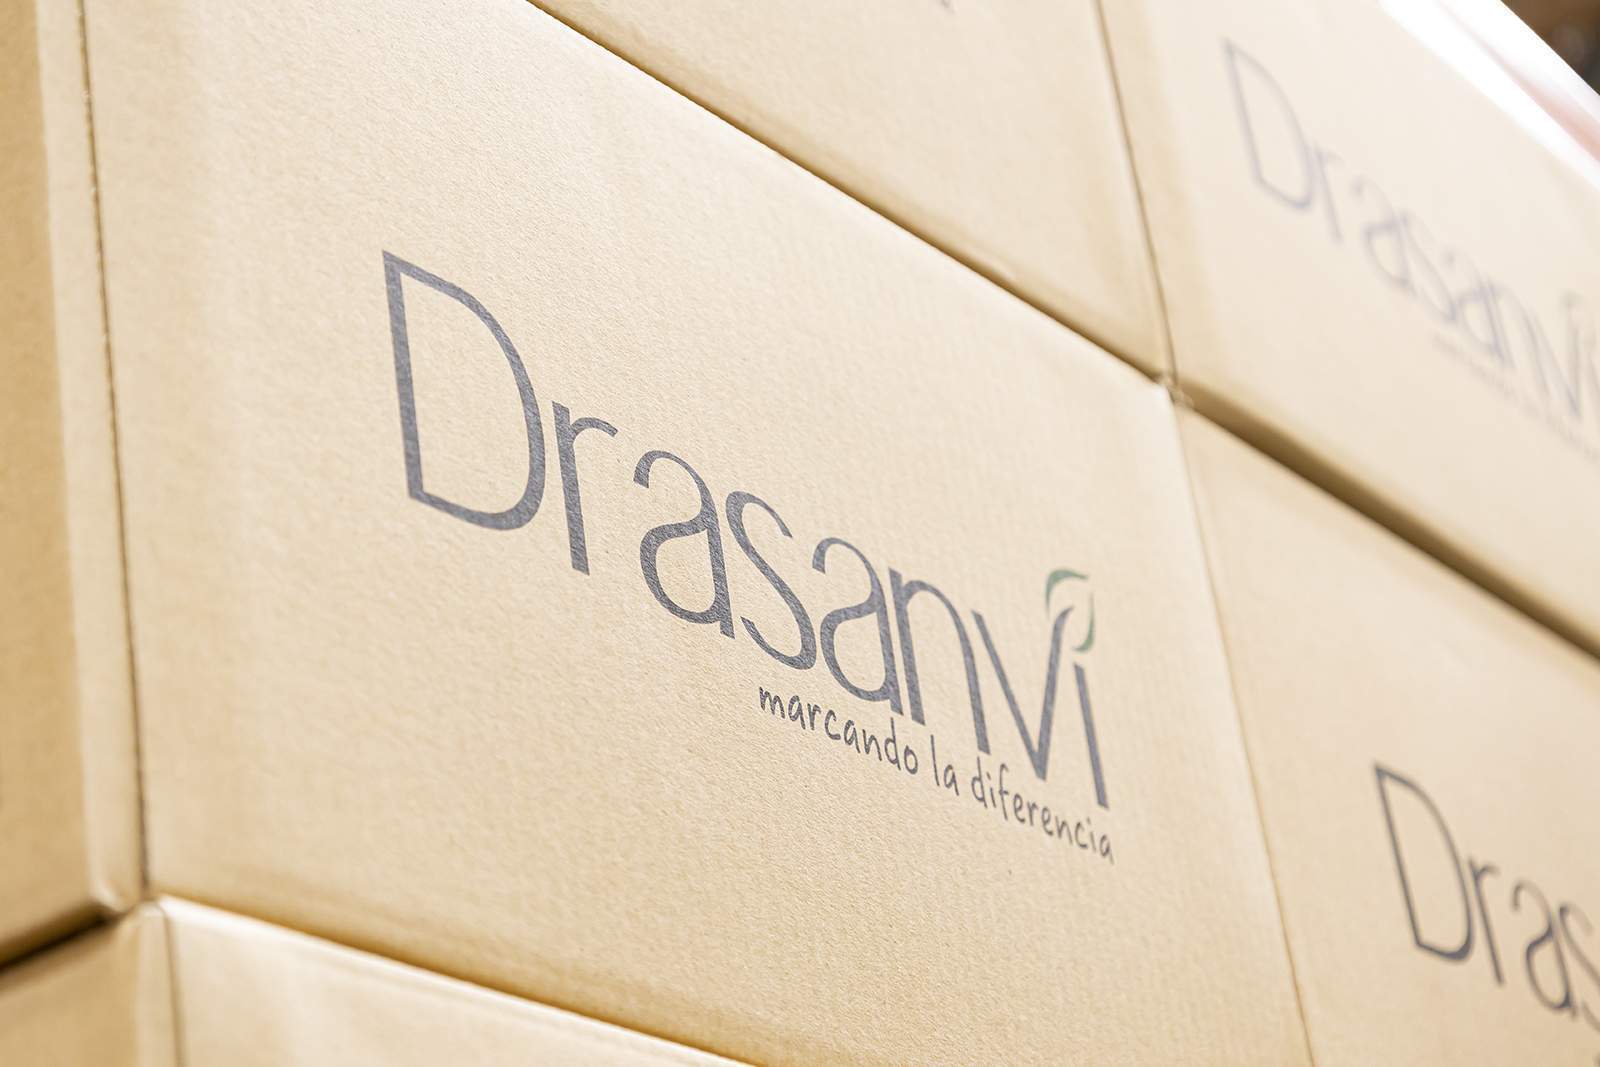 Our packaging and manufacturing processes are made with biodegradable, recyclable and recycled materials.